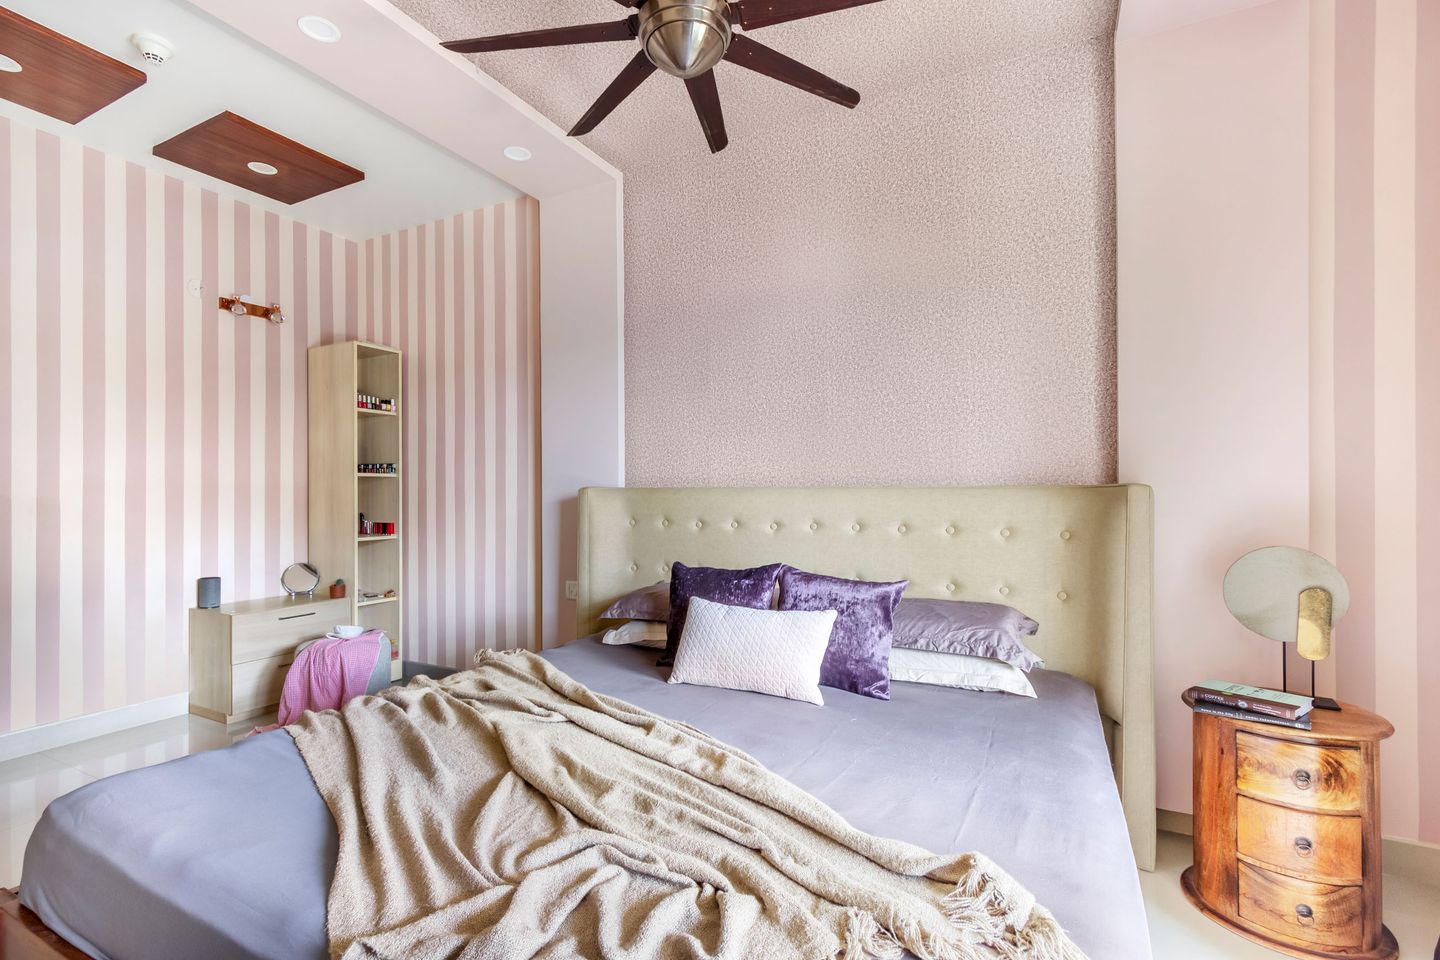 Kids Room Design With Pink And White Striped Wallpaper - Livspace